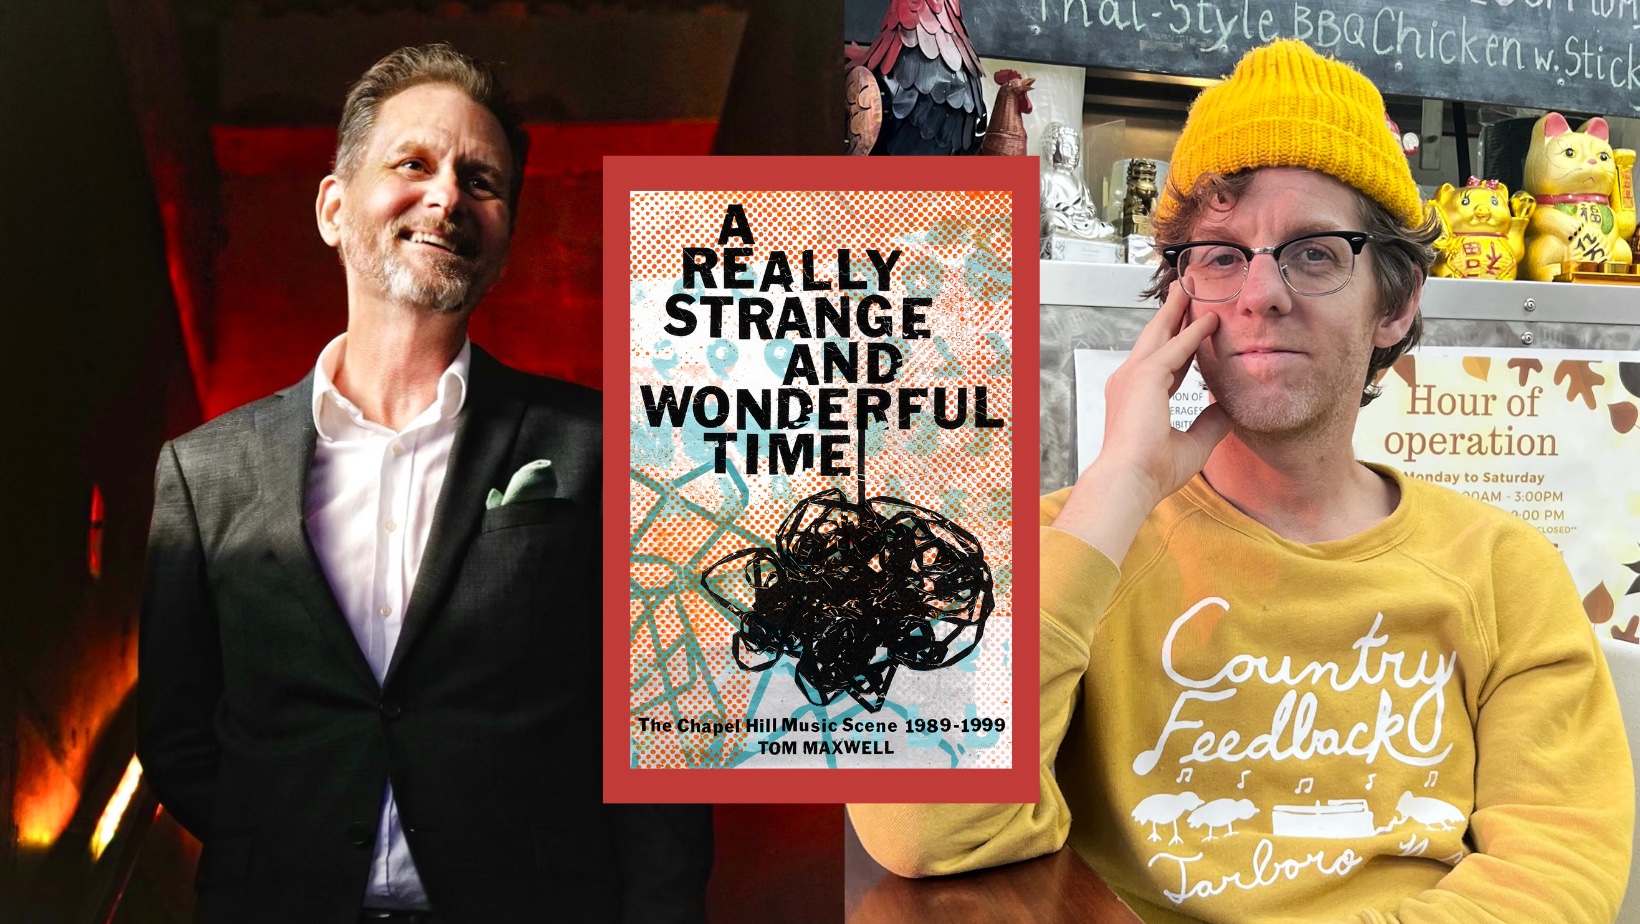 Collaged image of Tom Maxwell, his book "A Really Strange and Wonderful Time," and Mark Capon of Harvest Records.